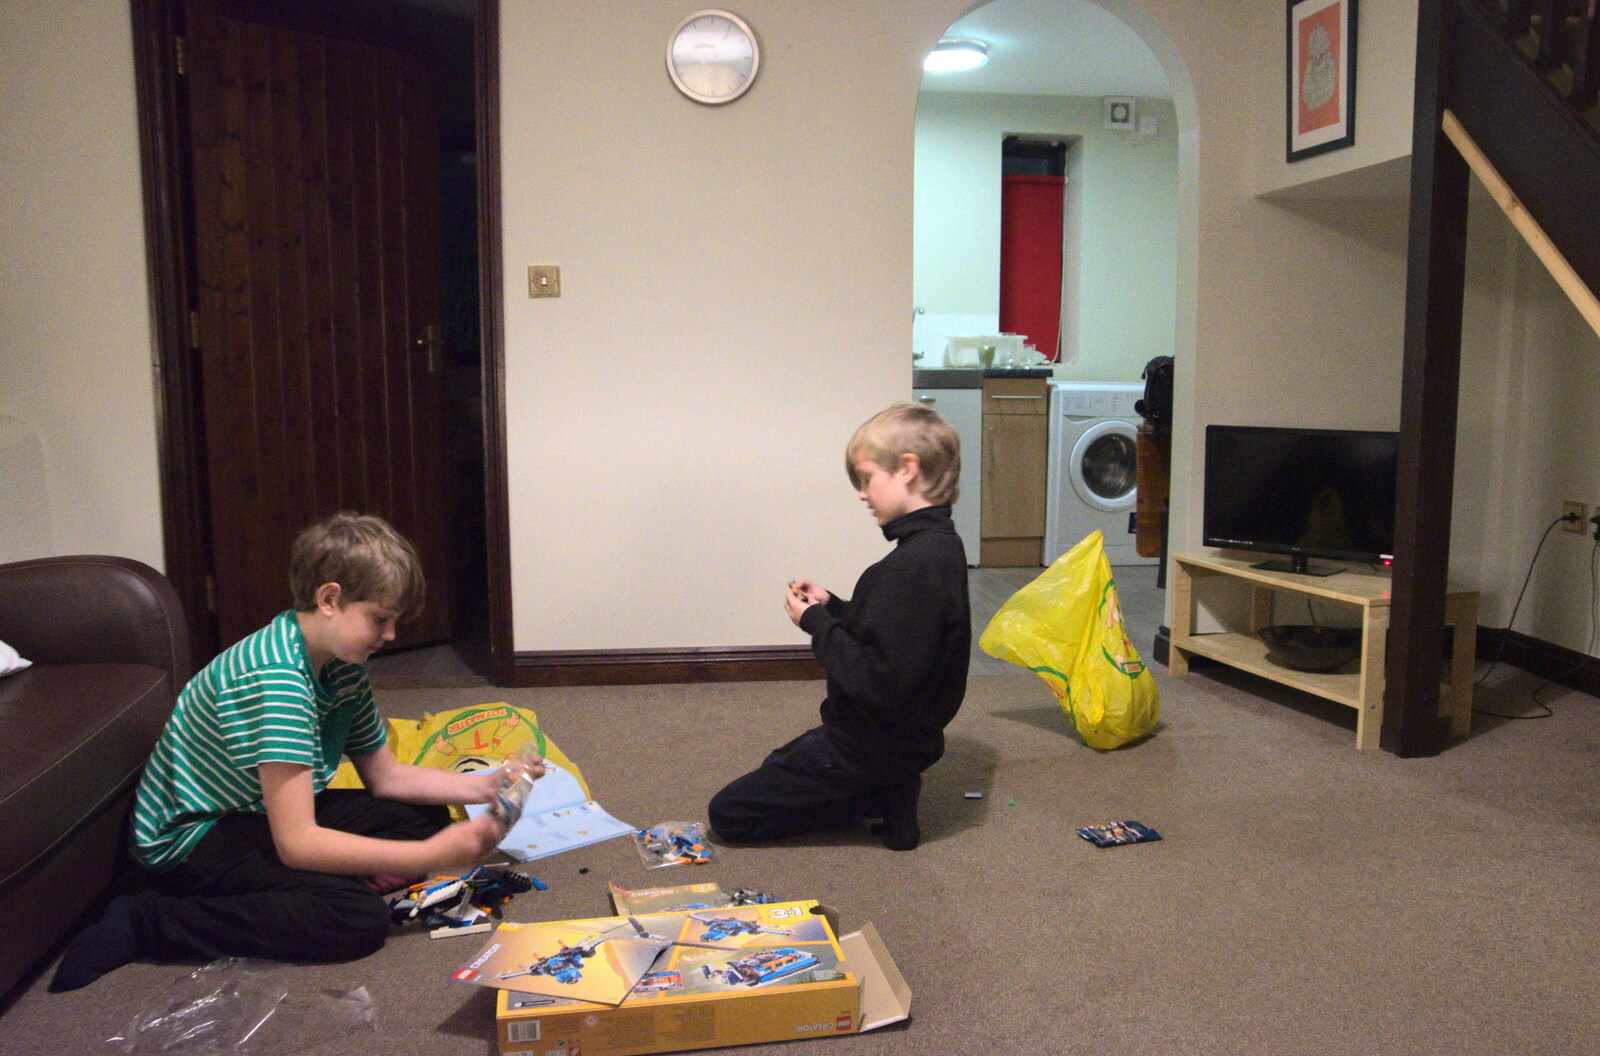 The boys play with their Hunstanton Lego from A Trip to Sandringham Estate, Norfolk - 31st October 2020